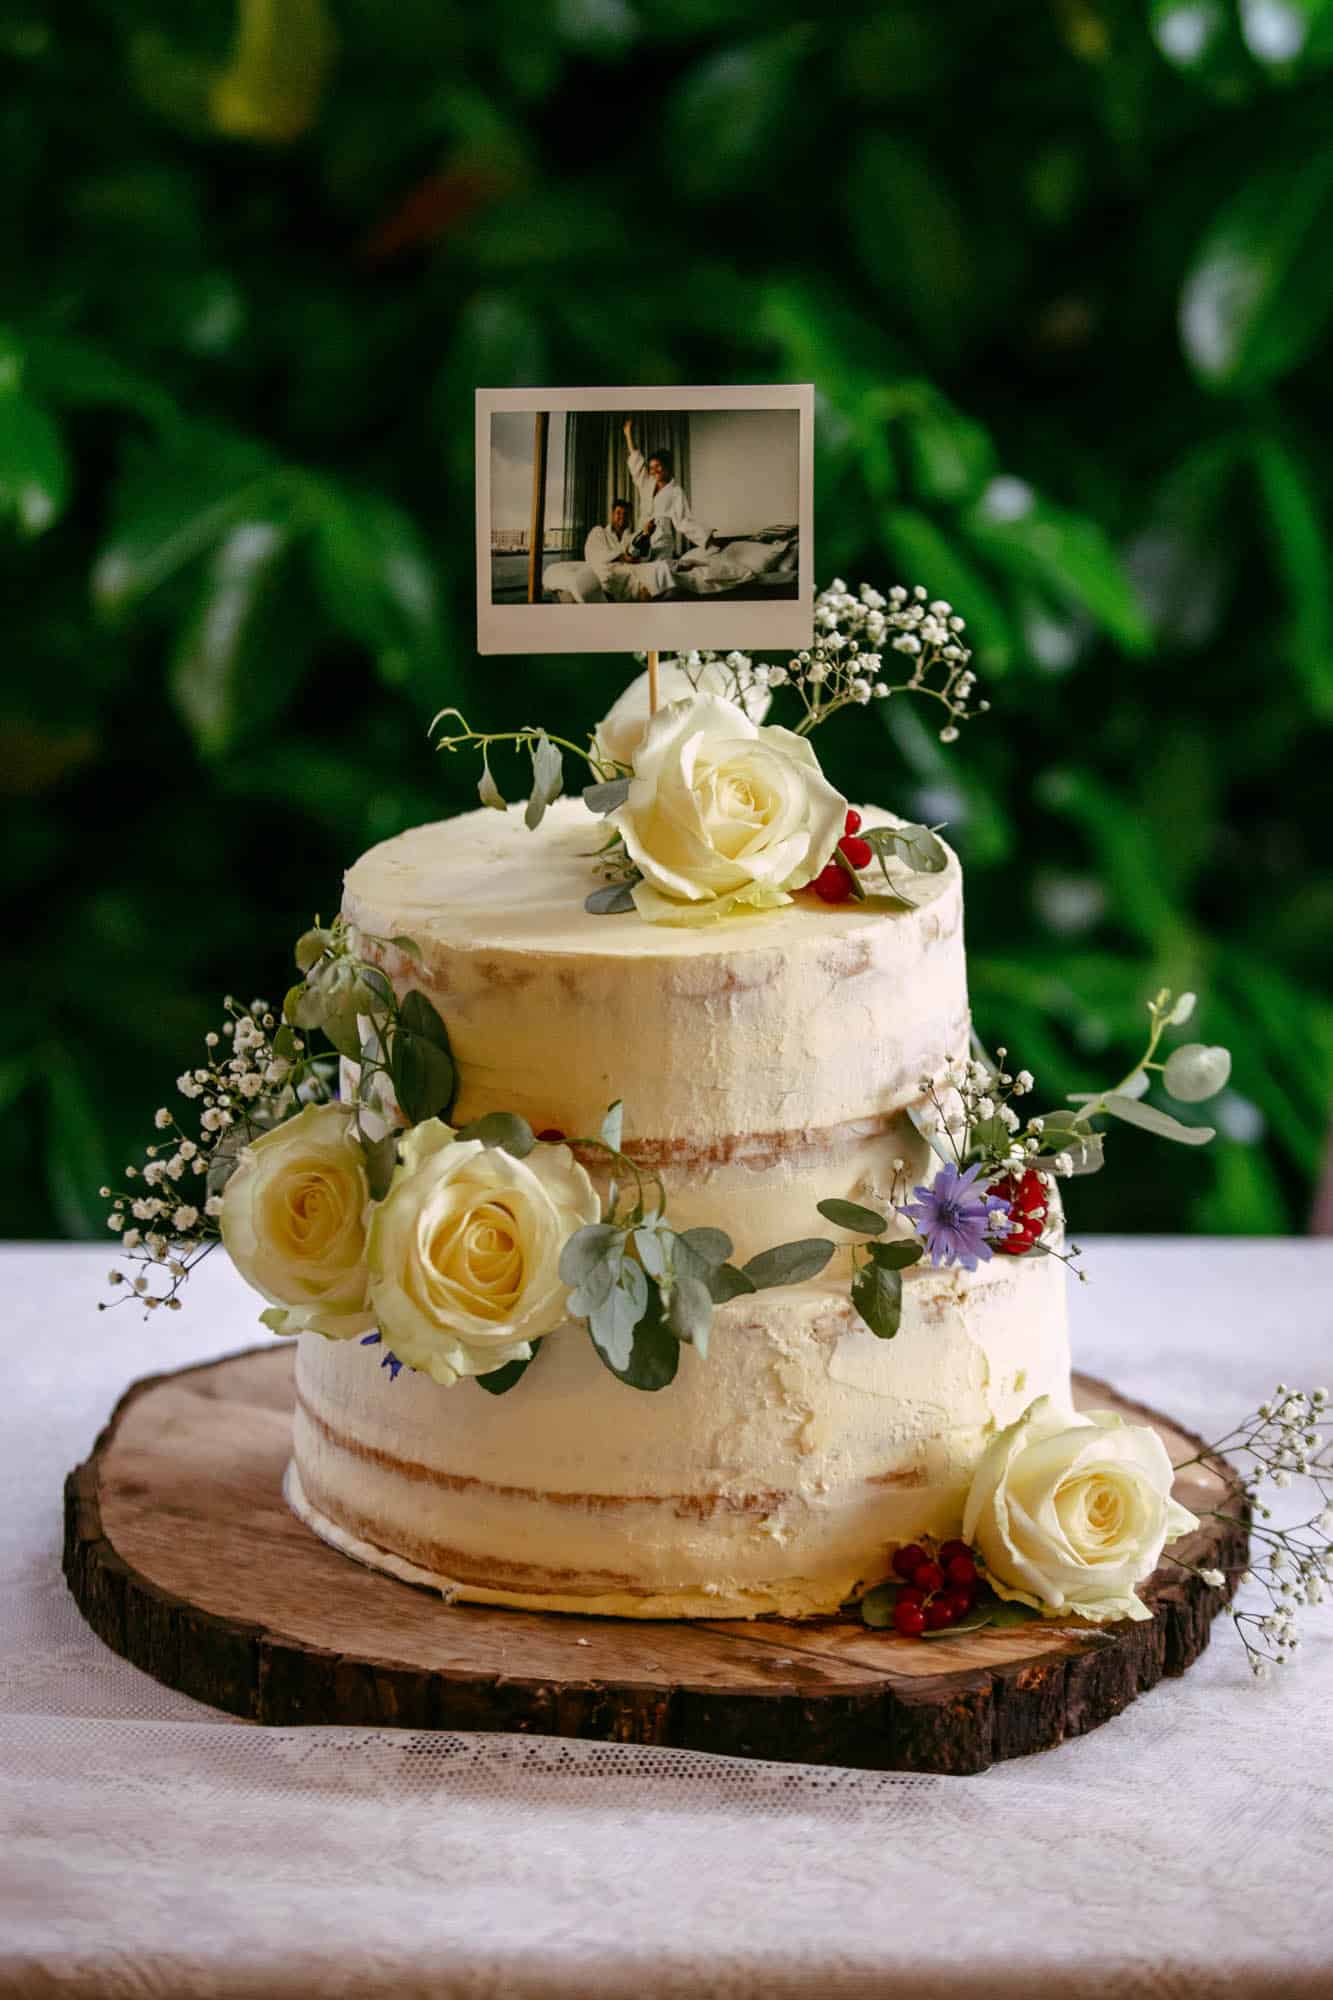 A wedding cake with a picture on it.